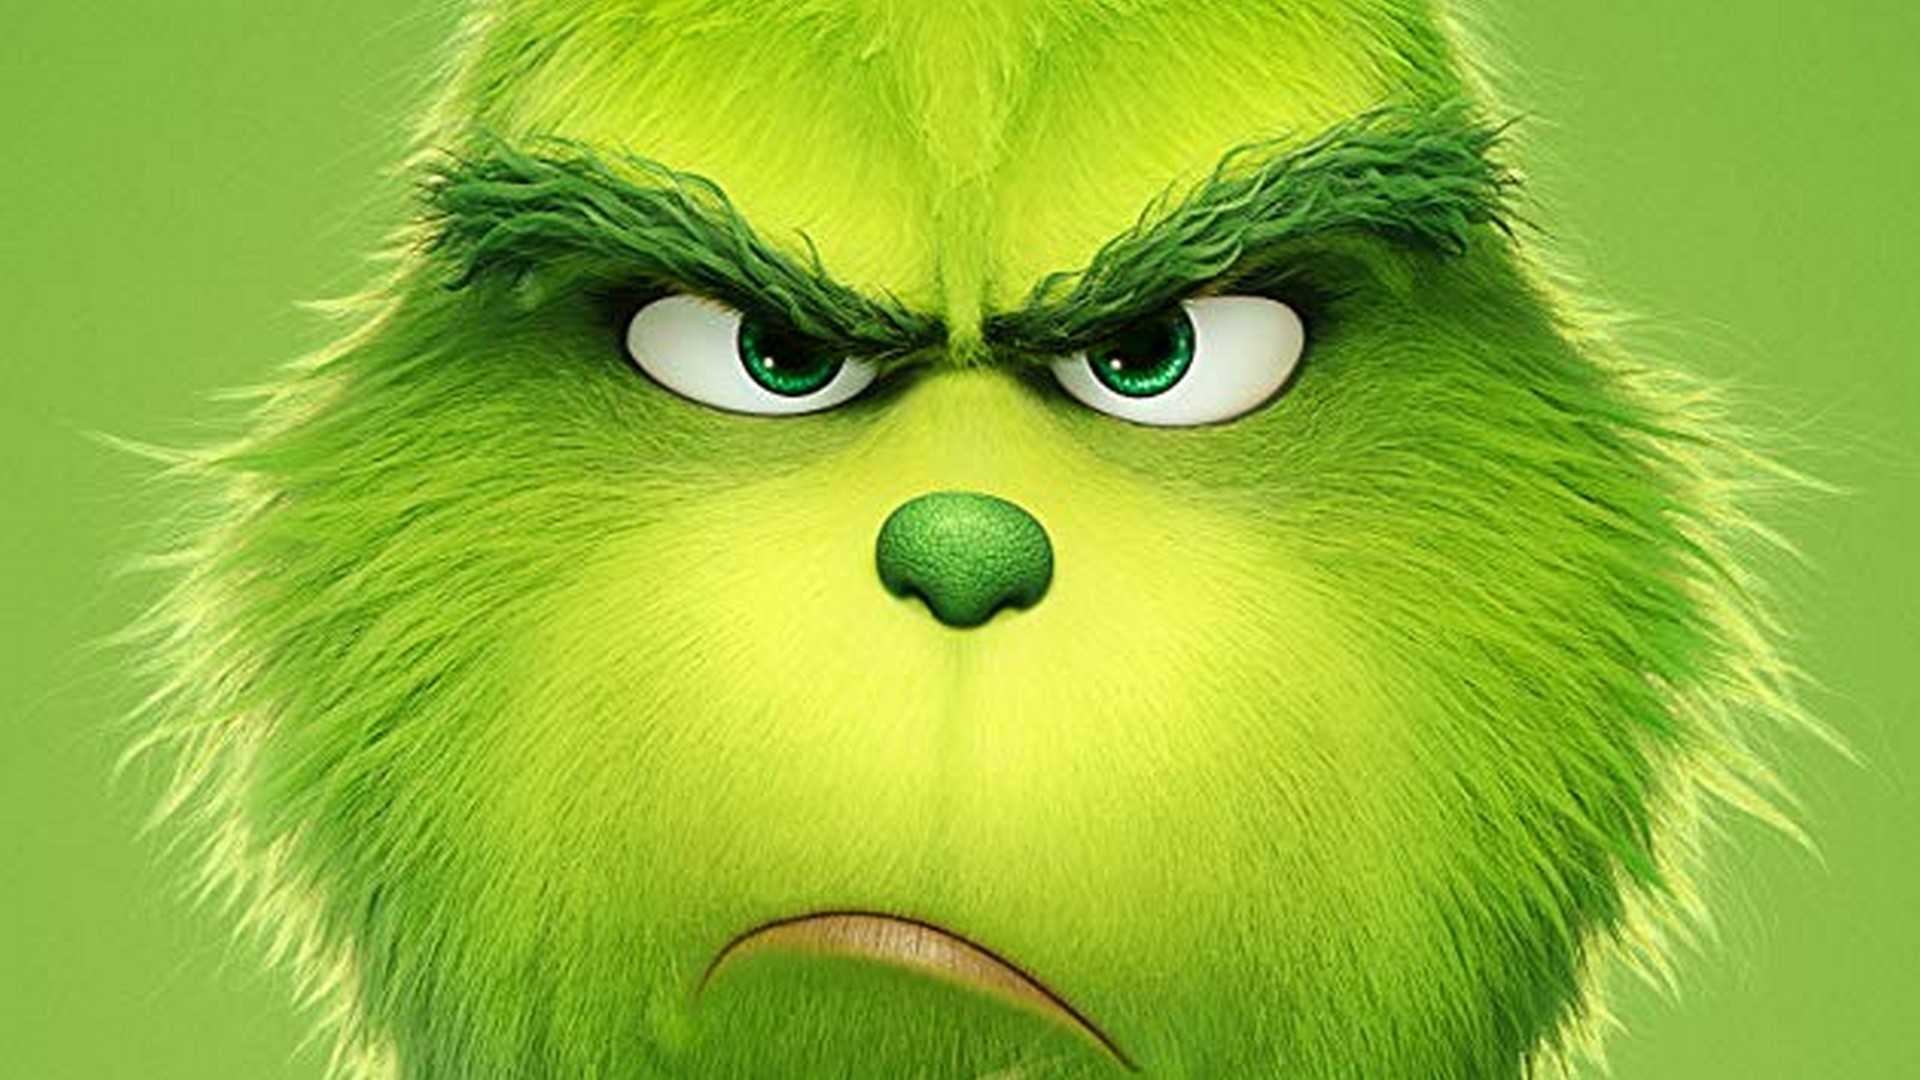 The Grinch 2018 Wallpaper HD With Resolution 1920X1080 pixel. You can make this wallpaper for your Desktop Computer Backgrounds, Mac Wallpapers, Android Lock screen or iPhone Screensavers